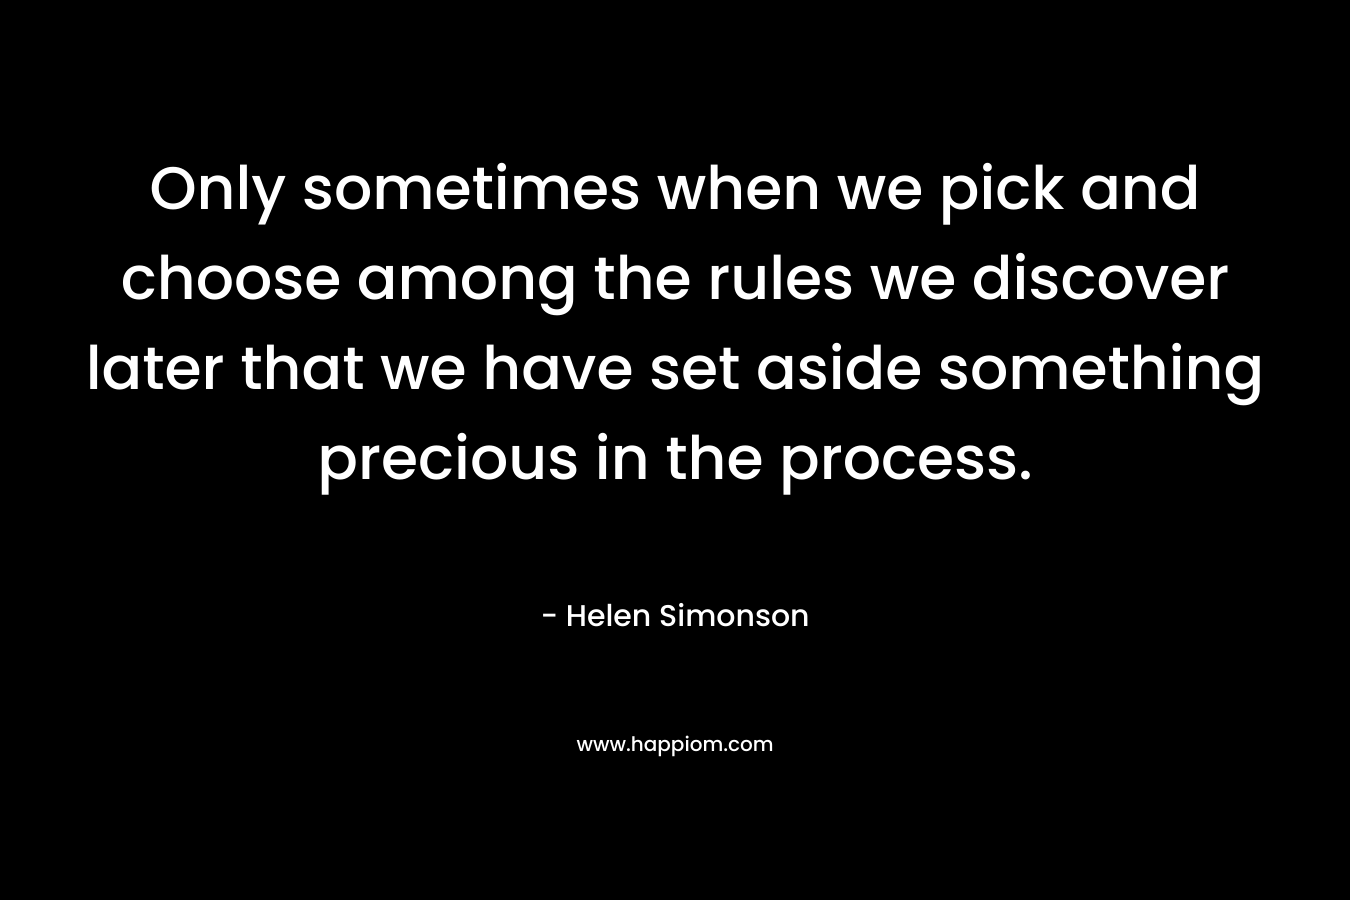 Only sometimes when we pick and choose among the rules we discover later that we have set aside something precious in the process.